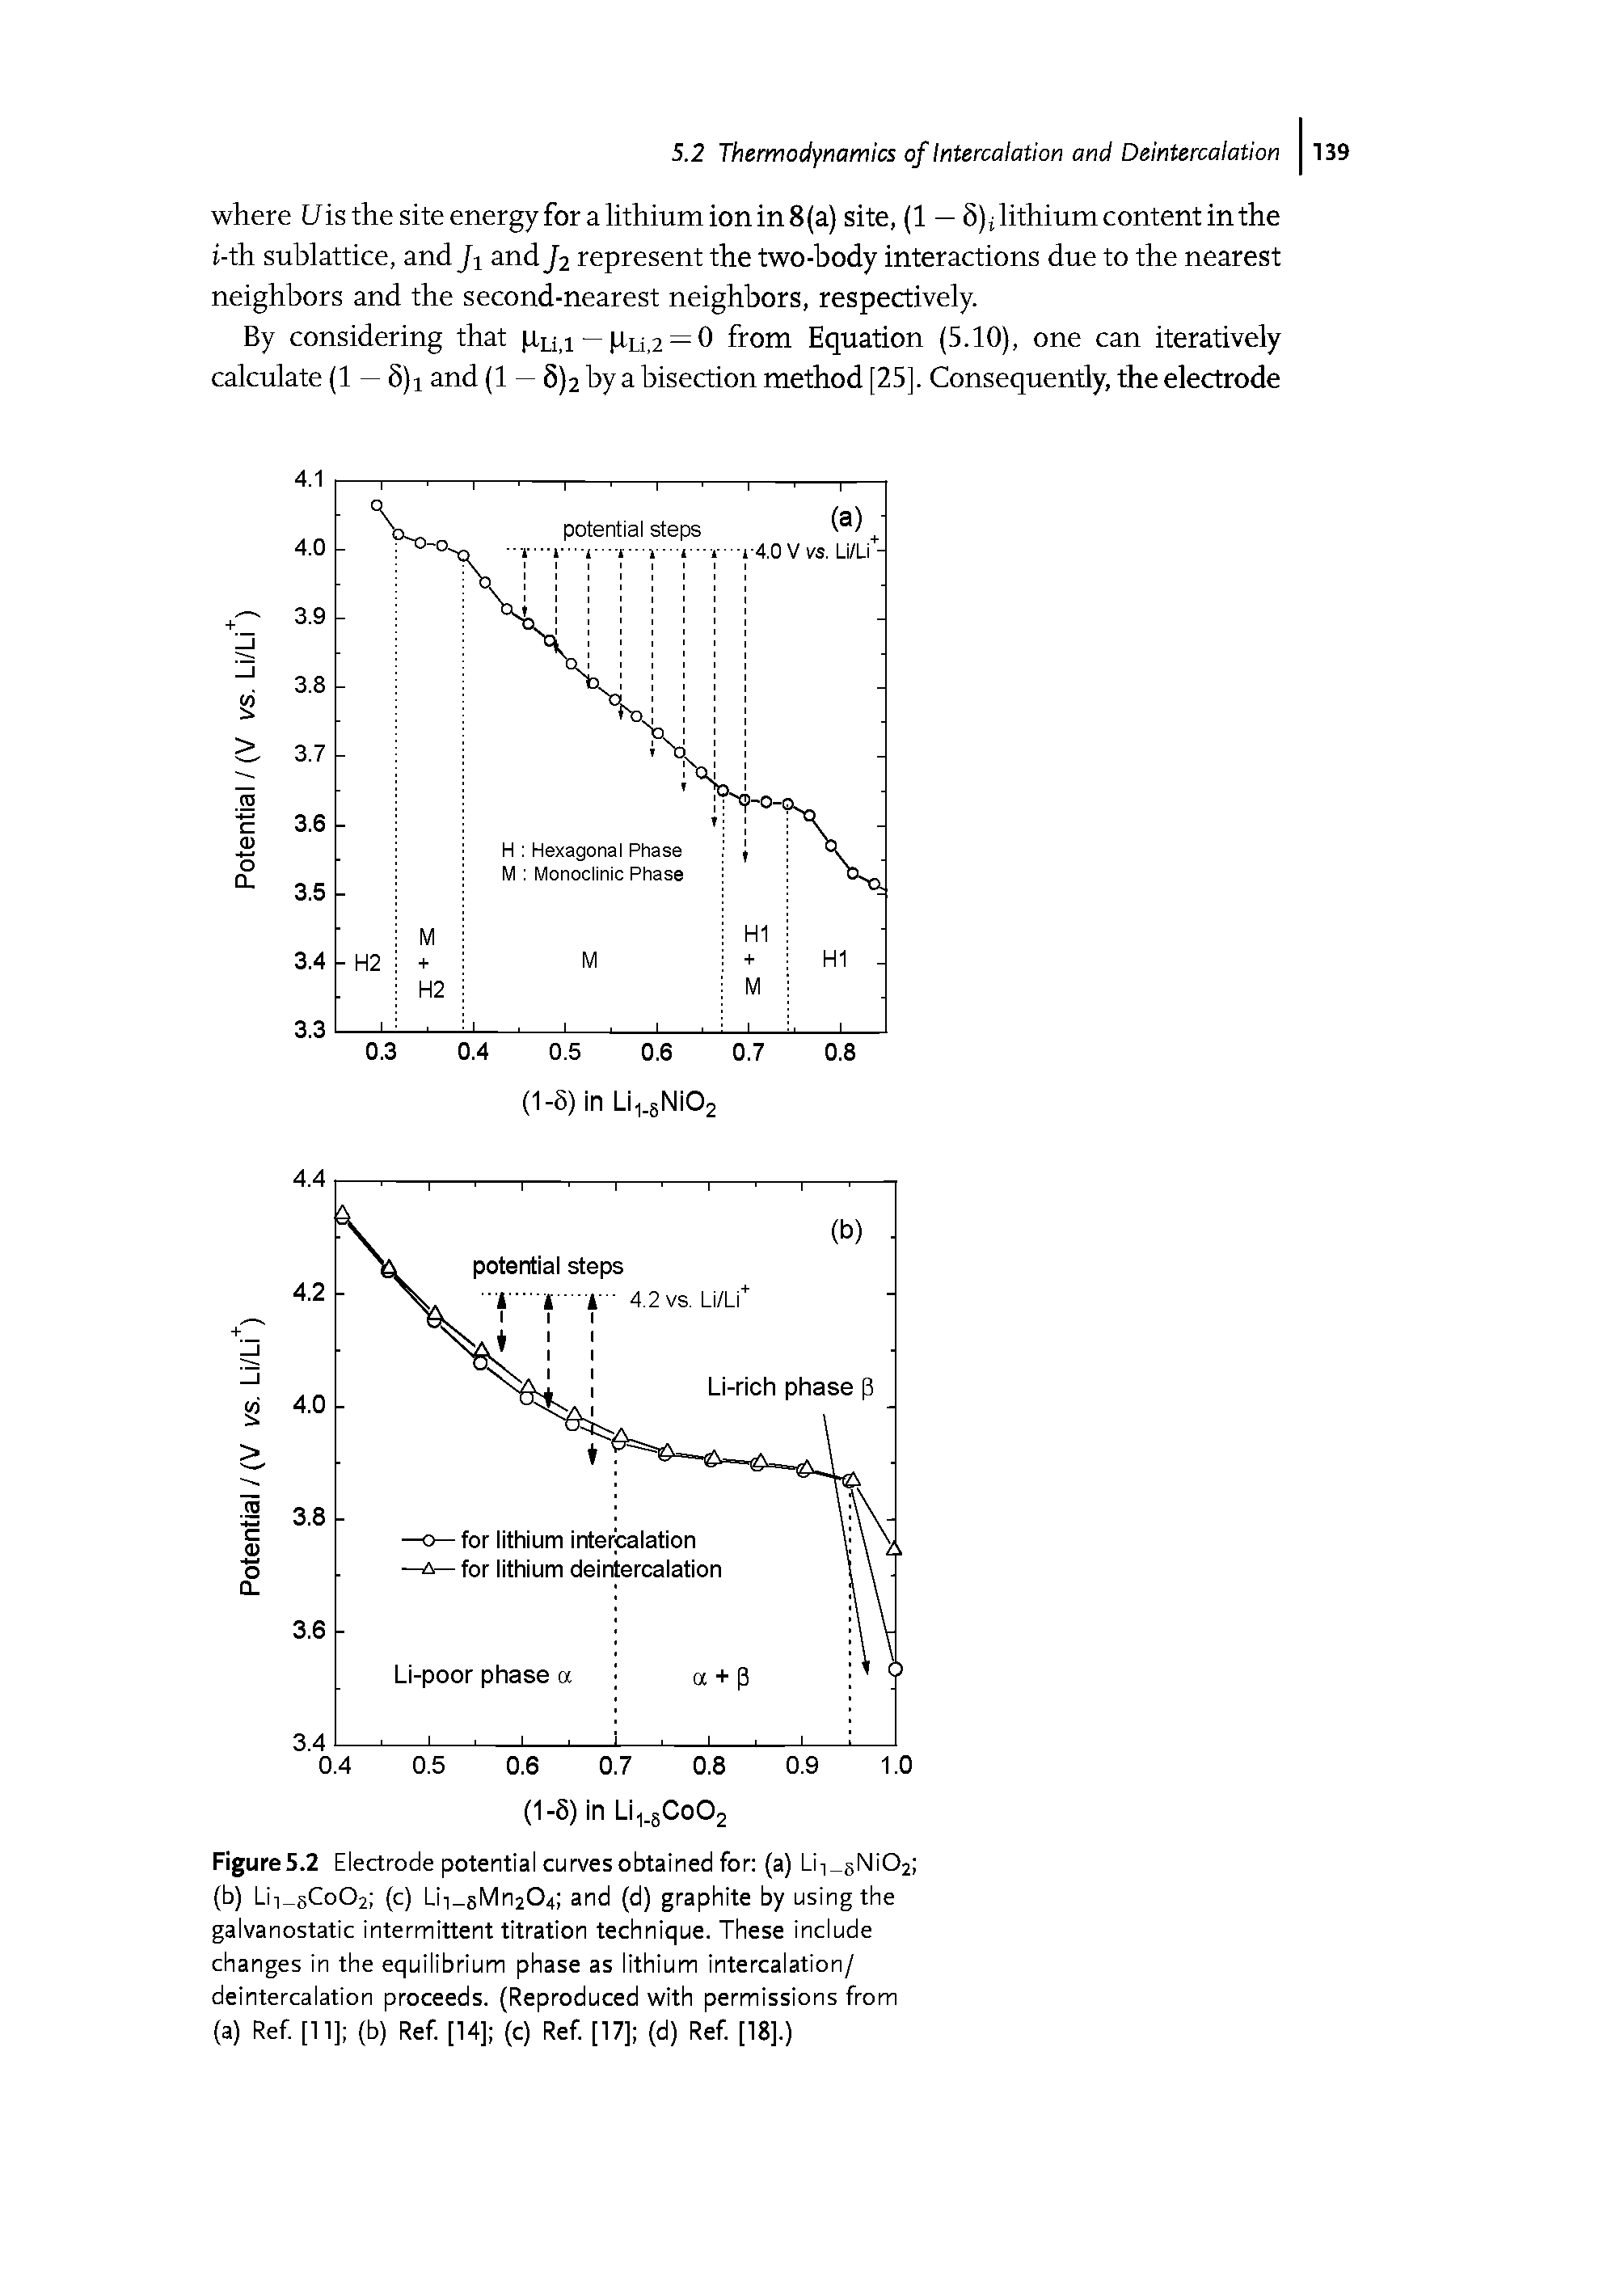 Figure5.2 Electrode potential curves obtained for (a) Lii NiO2 (b) Lii CoO2 (c) Lii 5Mn2O4 and (d) graphite by using the galvanostatic intermittent titration technique. These include changes in the equilibrium phase as lithium intercalation/ deintercalation proceeds. (Reproduced with permissions from (a) Ref. [11] (b) Ref. [14] (c) Ref. [17] (d) Ref. [18].)...